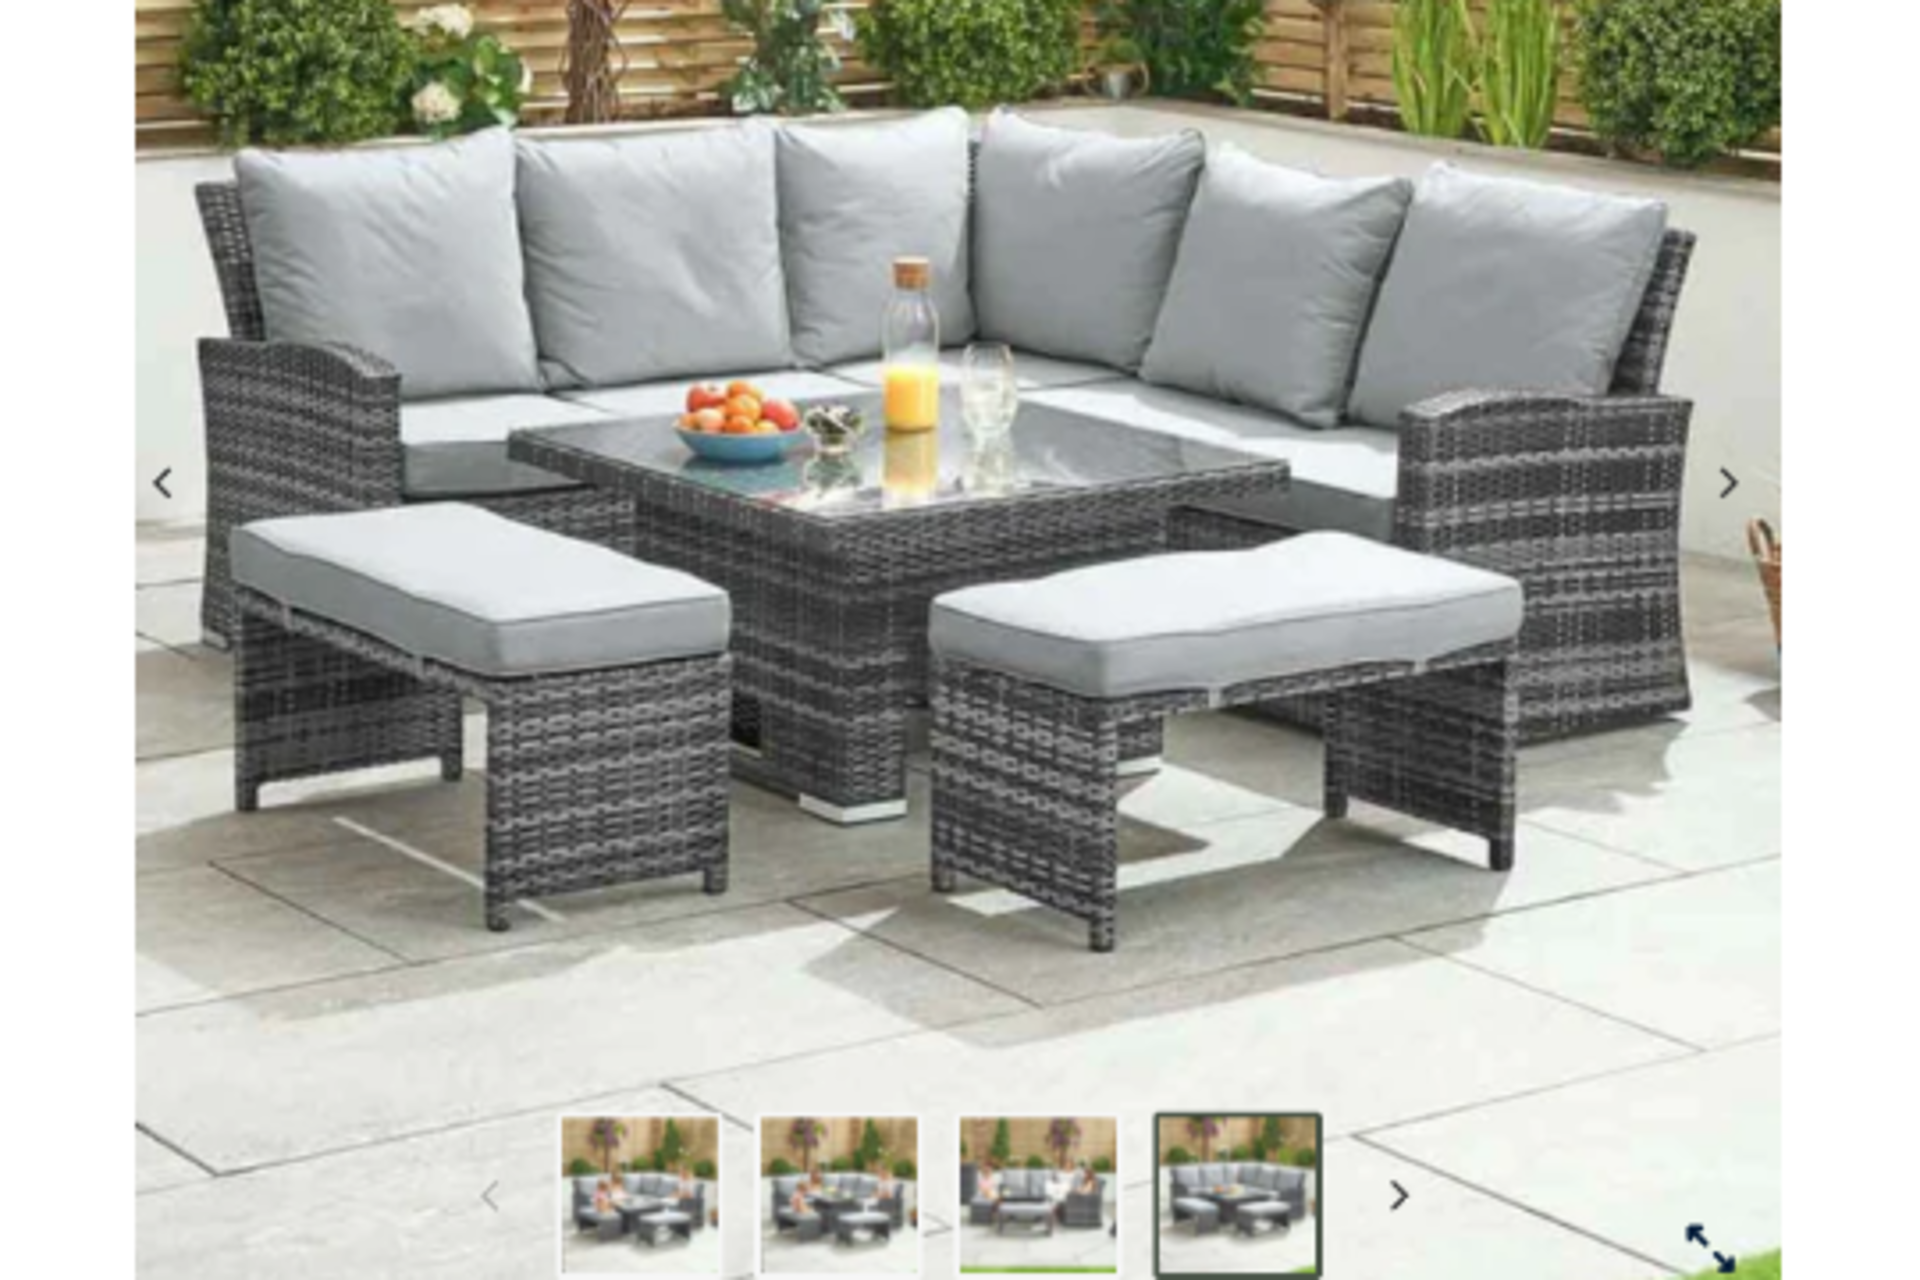 New & Boxed Nova Garden Furniture Cambridge Grey Weave Compact Corner Dining Set with Rising - Image 2 of 3